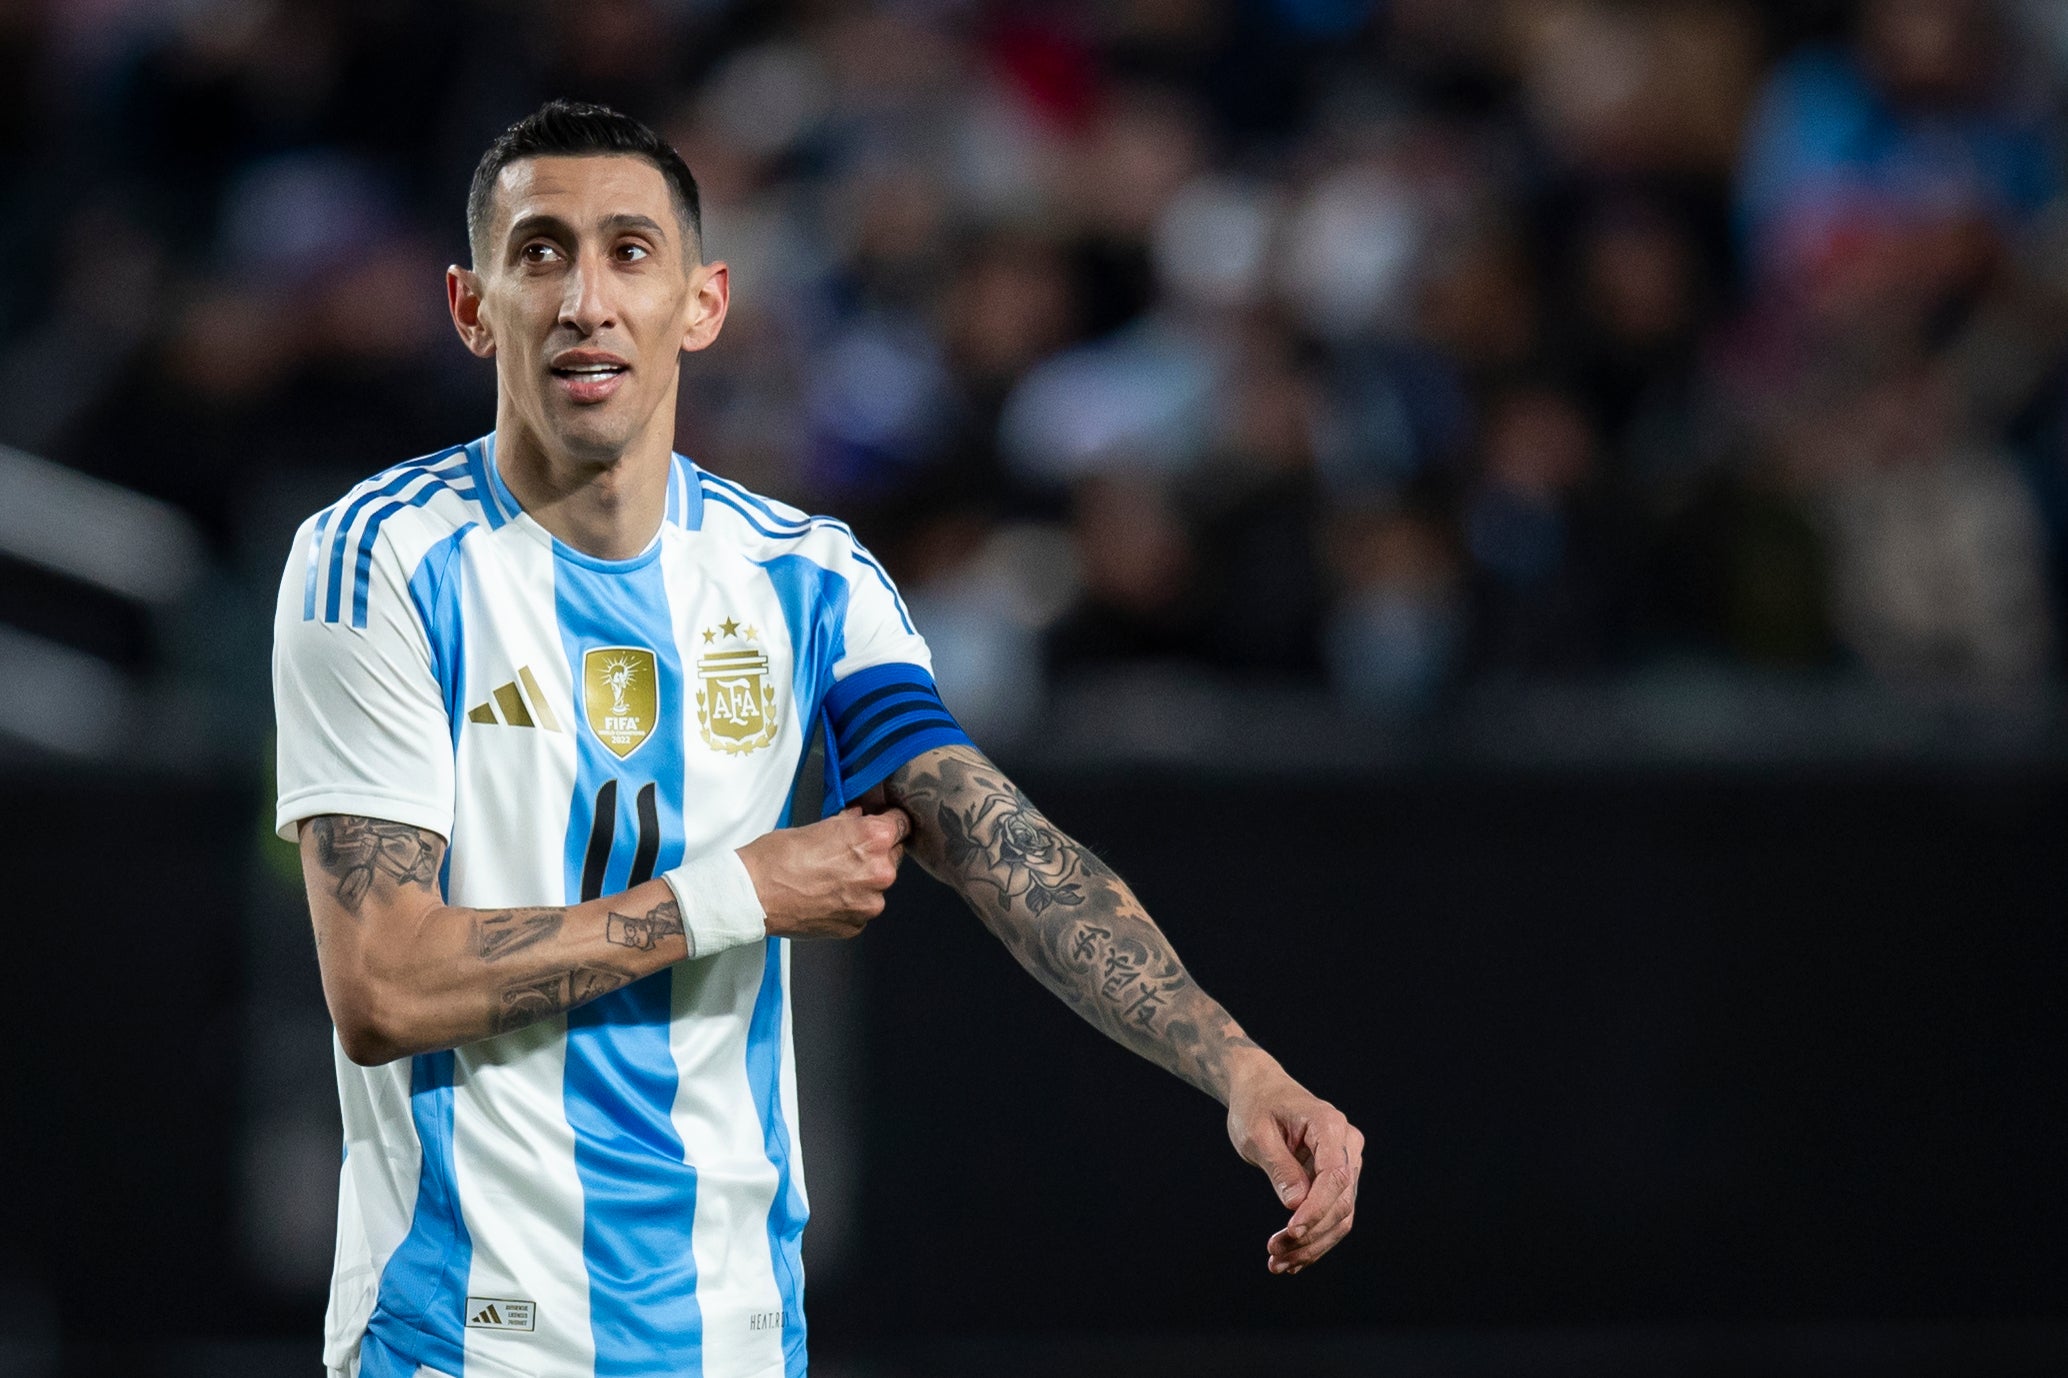 Angel Di Maria had suggested that he wished to end his career at his boyhood club